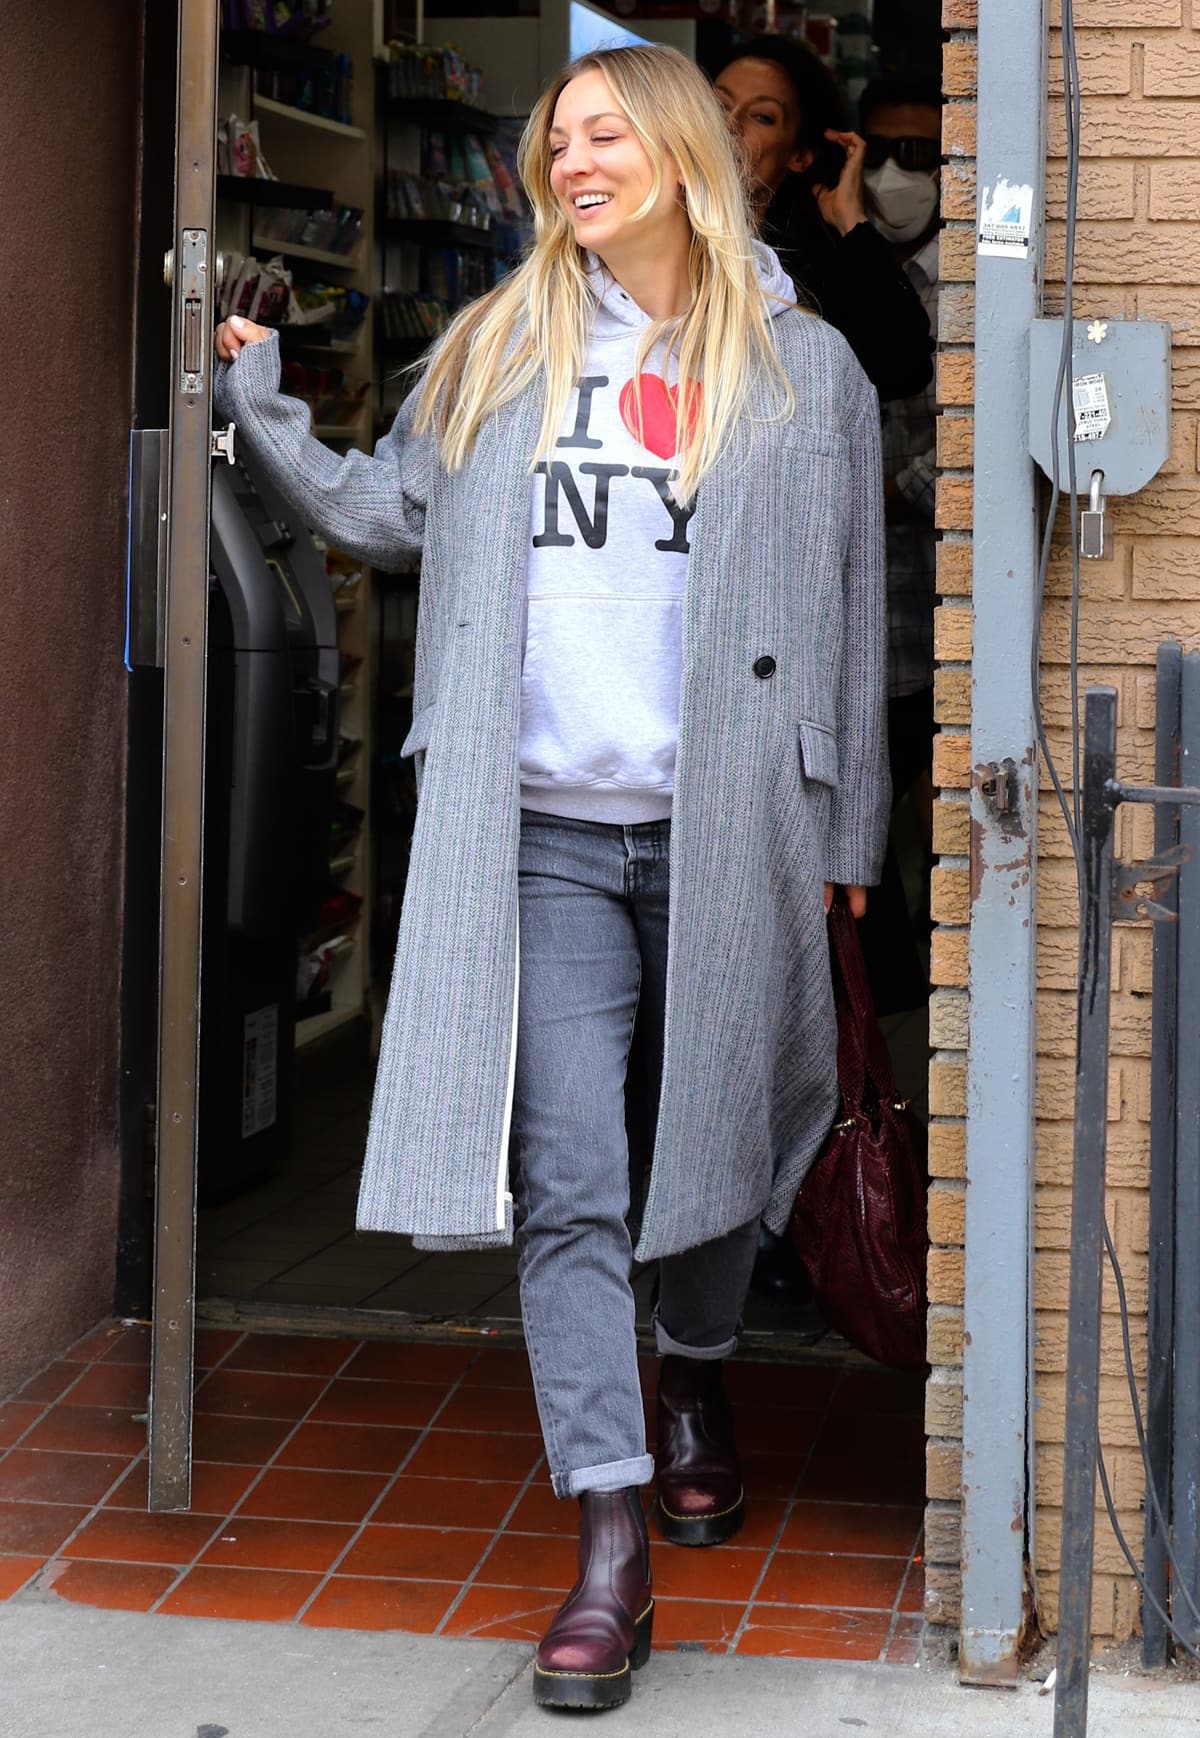 Kaley Cuoco wears an 'I Love New York' hoodie with a grey overcoat, cuffed faded denim jeans, and boots with the famous yellow Dr. Martens stitch while filming The Flight Attendant